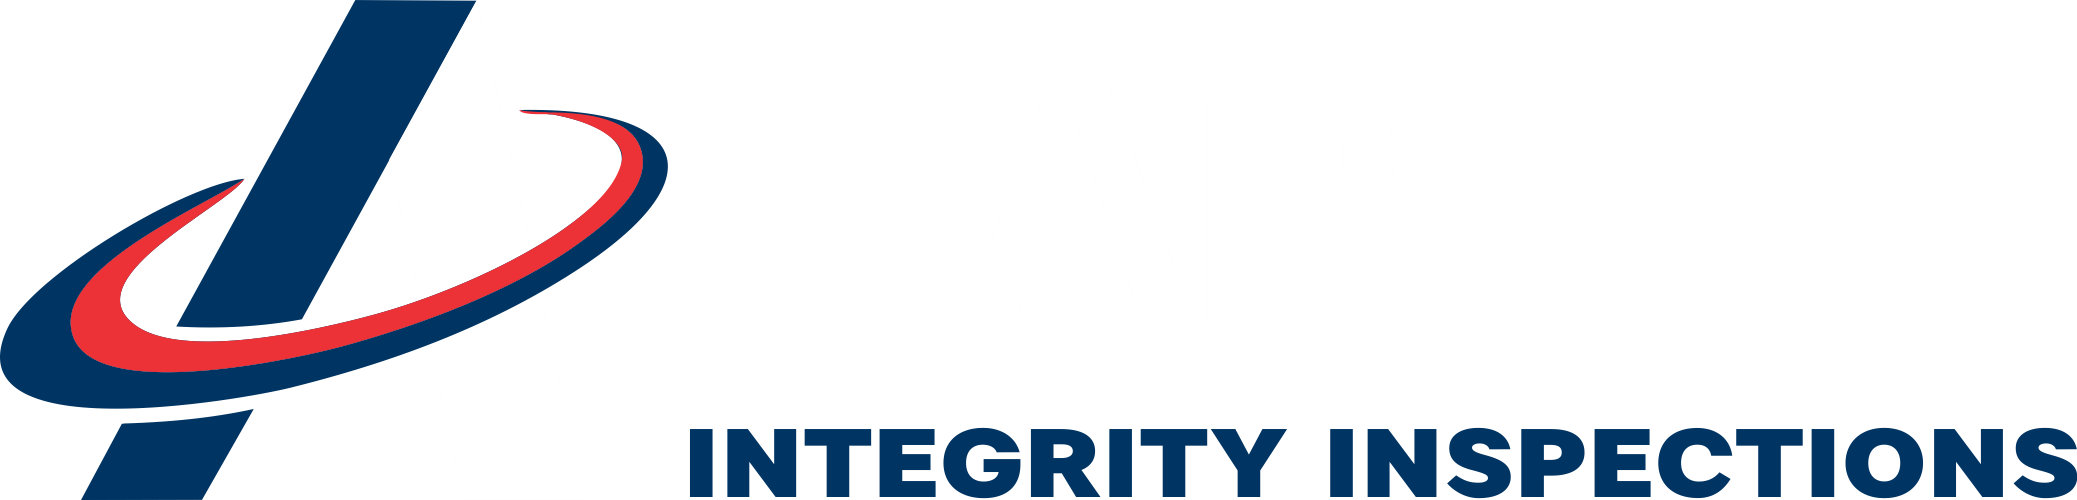 Apex Integrity Inspections - Inspect to Protect